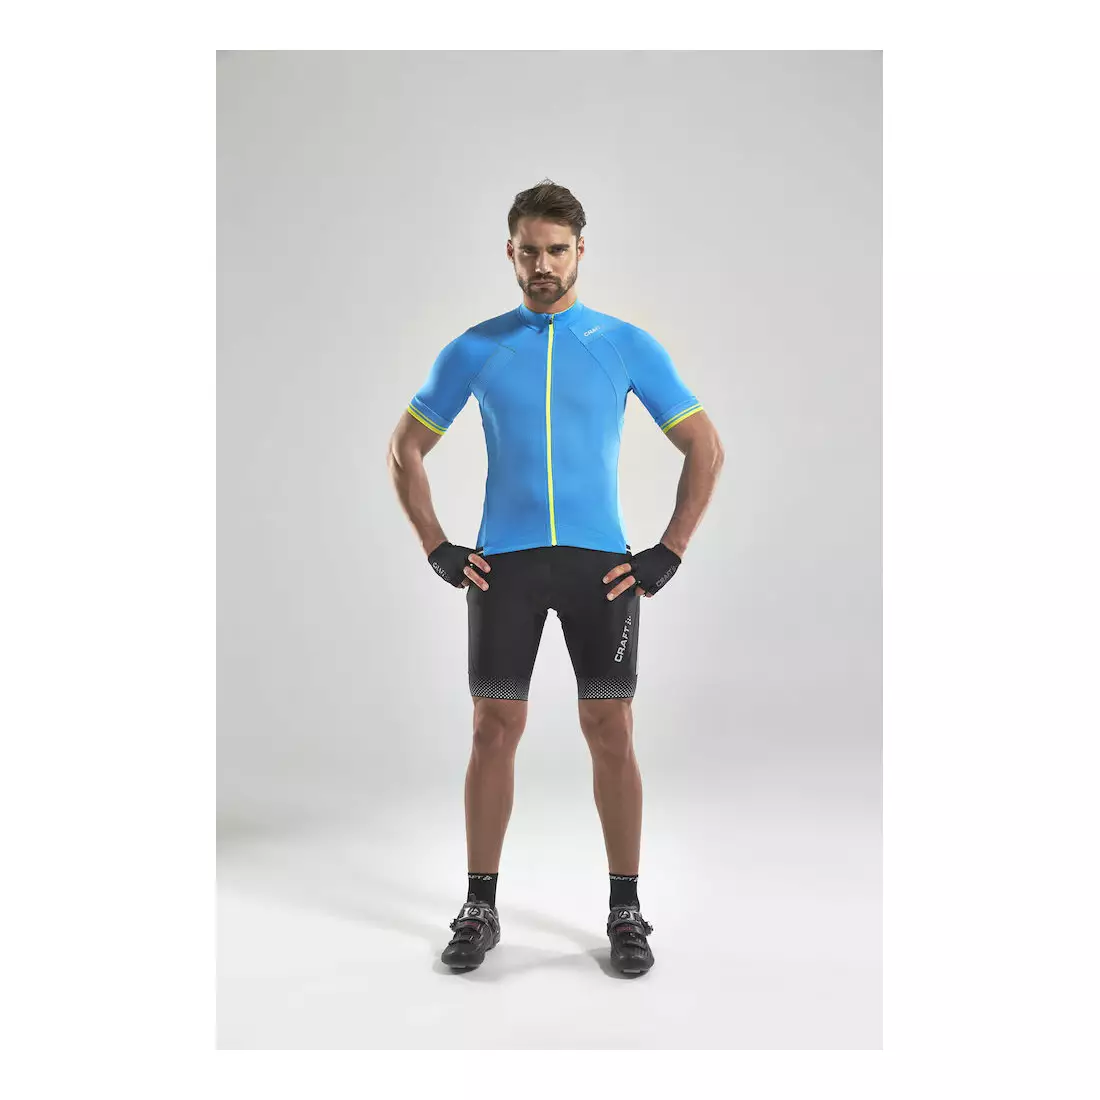 CRAFT PUNCHEUR cycling jersey 1903294-2317